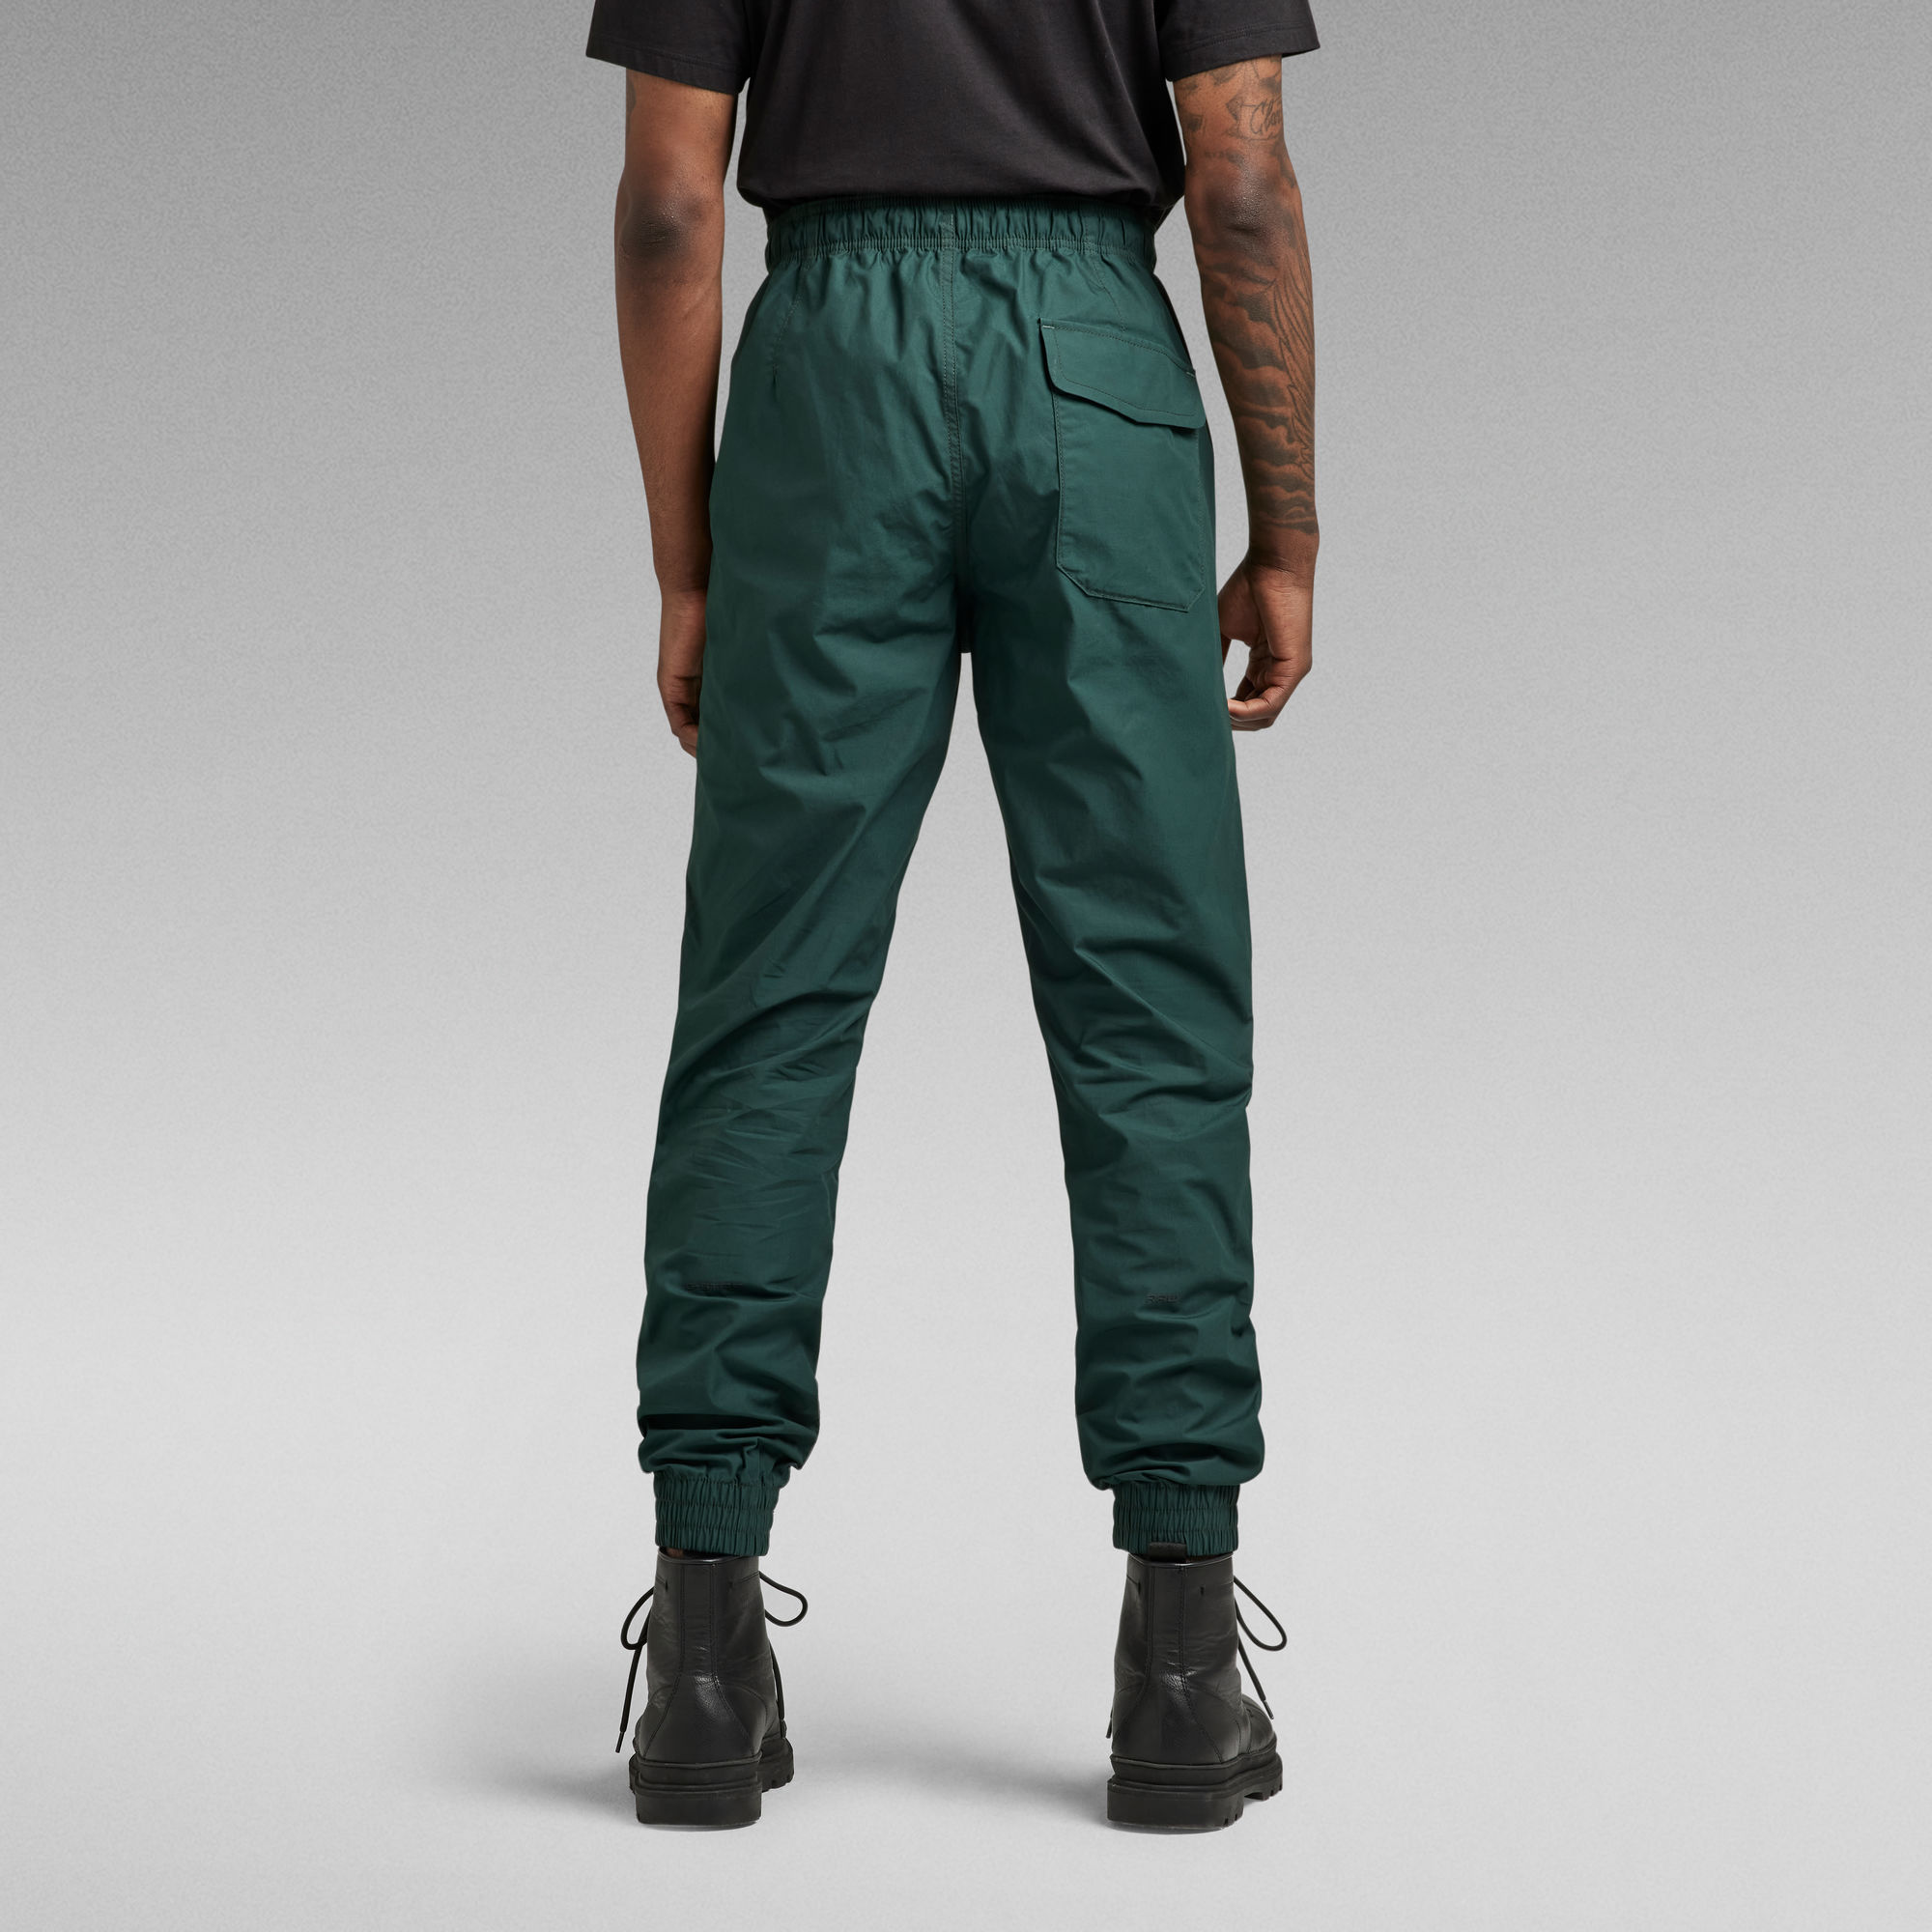 Trainer RCT | Green | G-Star RAW®